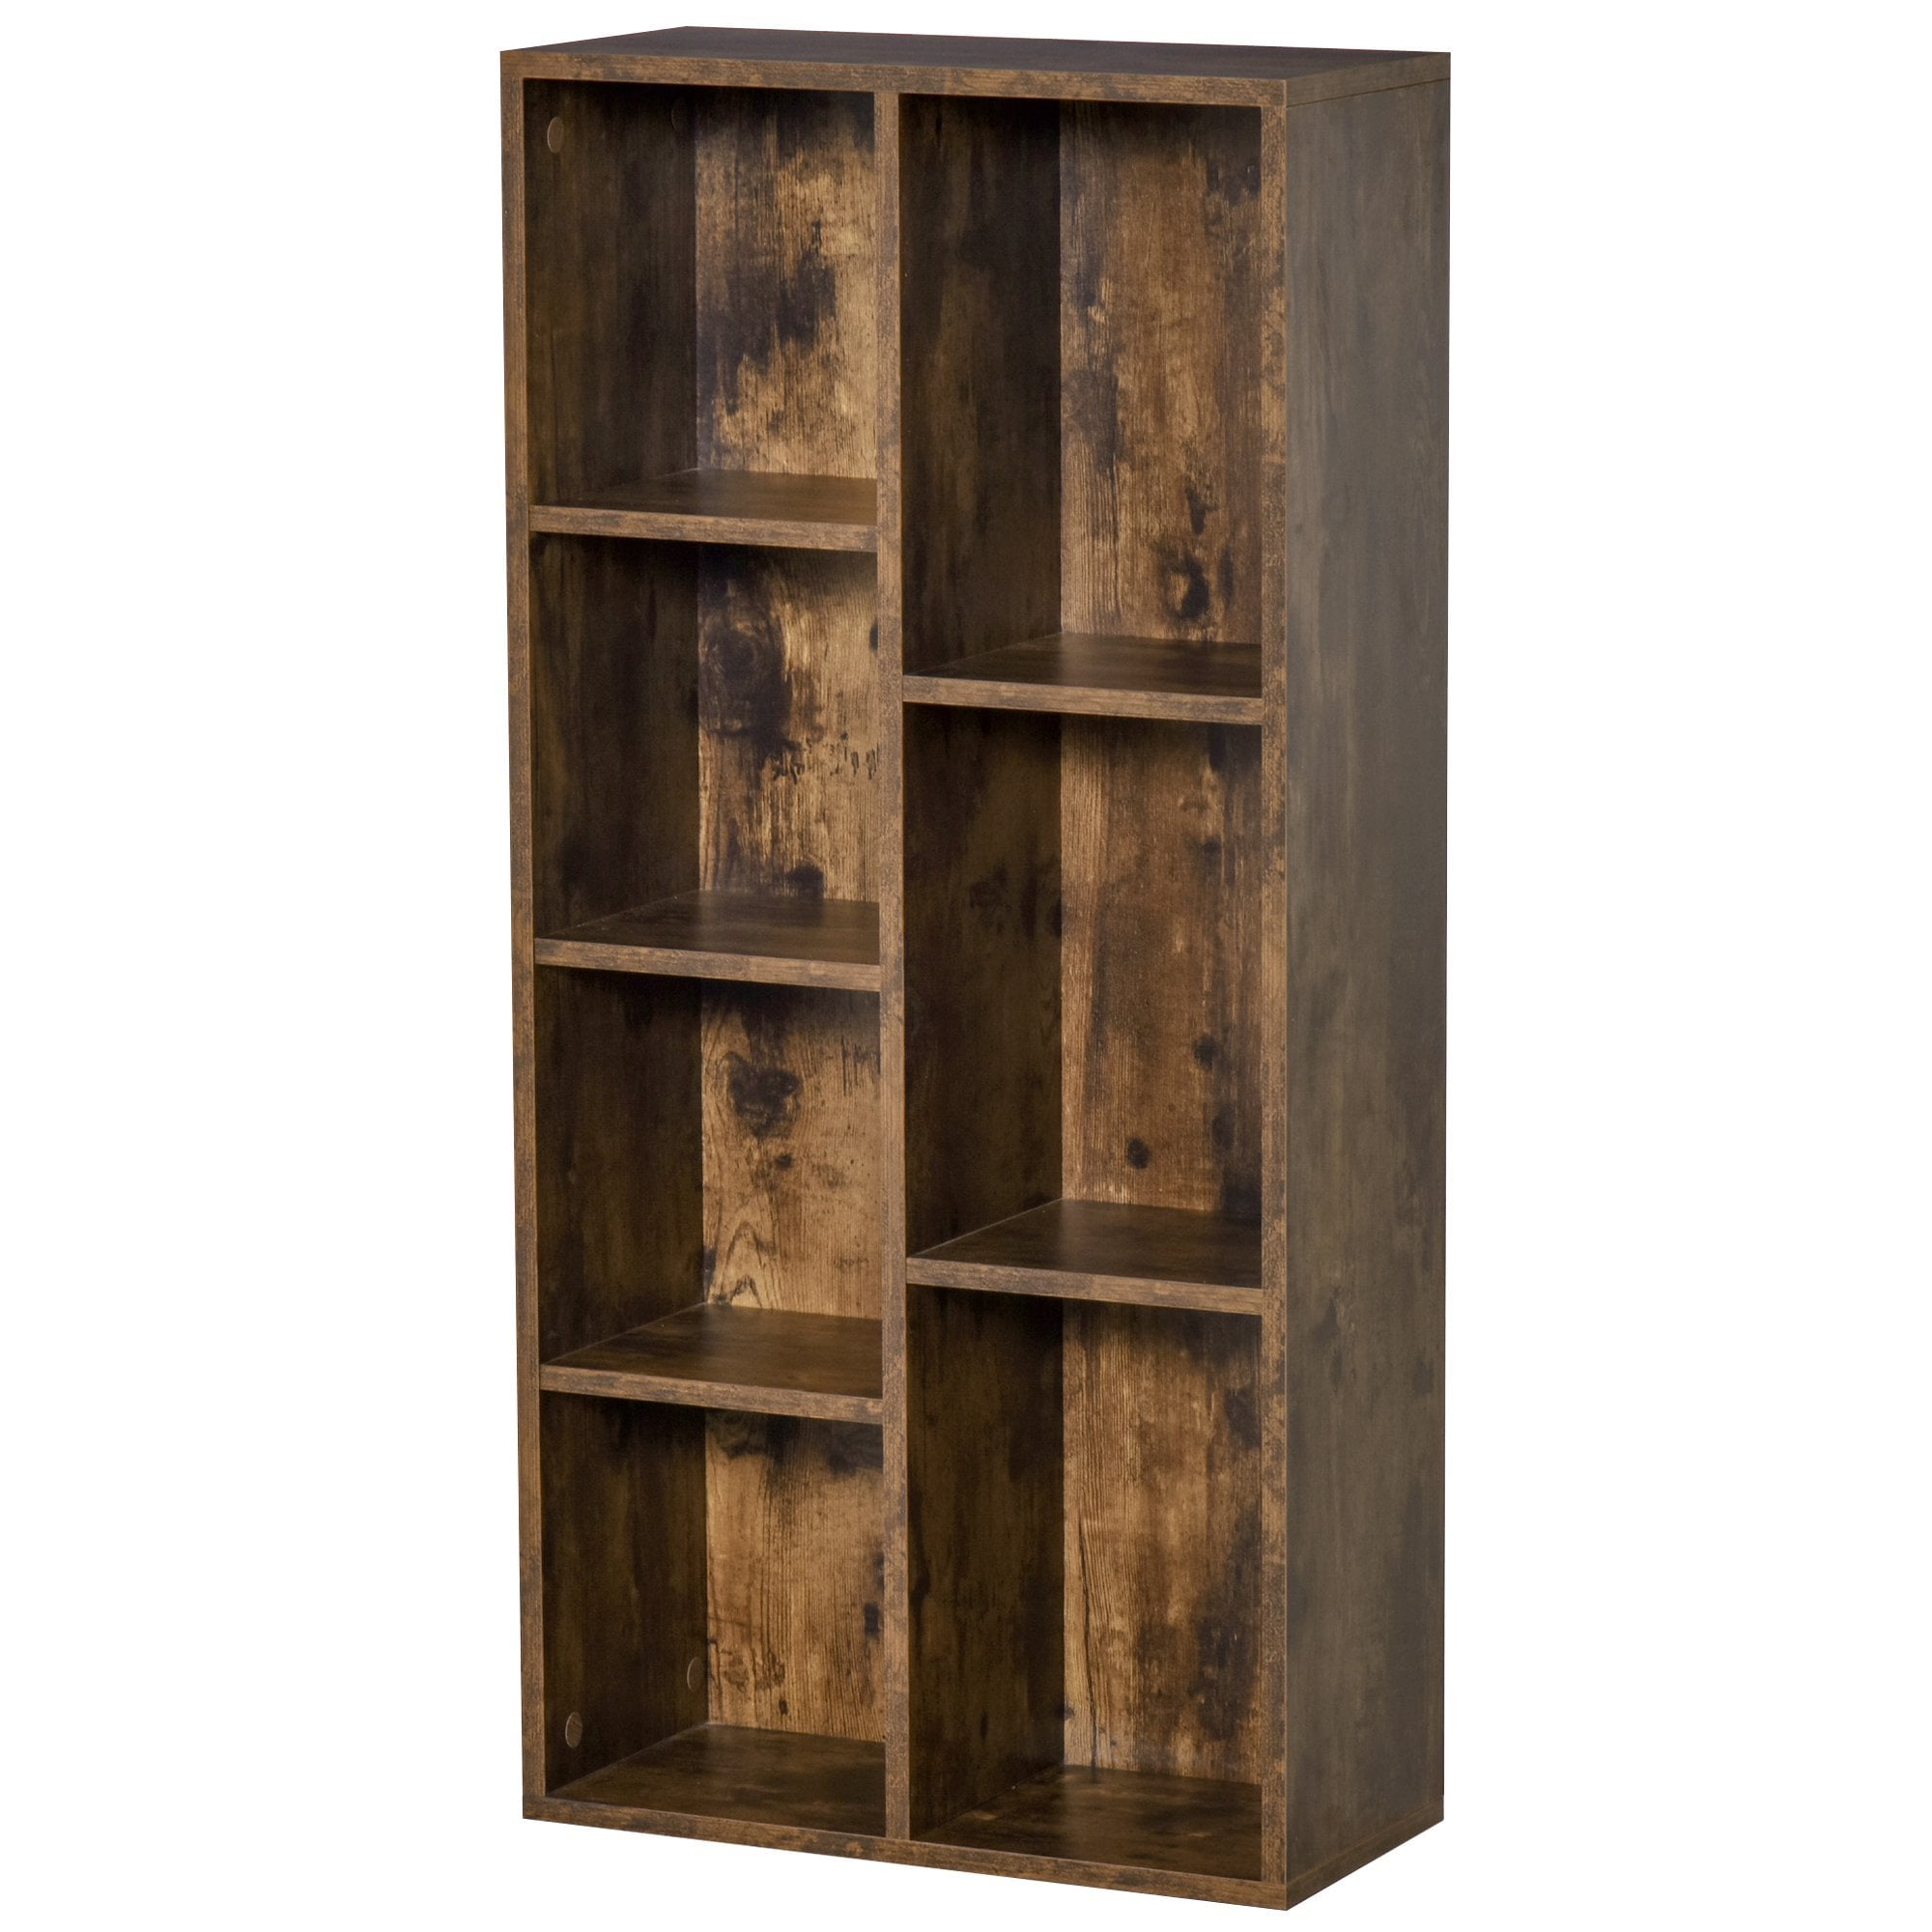 Bookcase Industrial Bookshelf Free Standing Display Cabinet Cube Storage Unit for Home Office Living Room Study Rustic Brown Modern - Home Living  | T